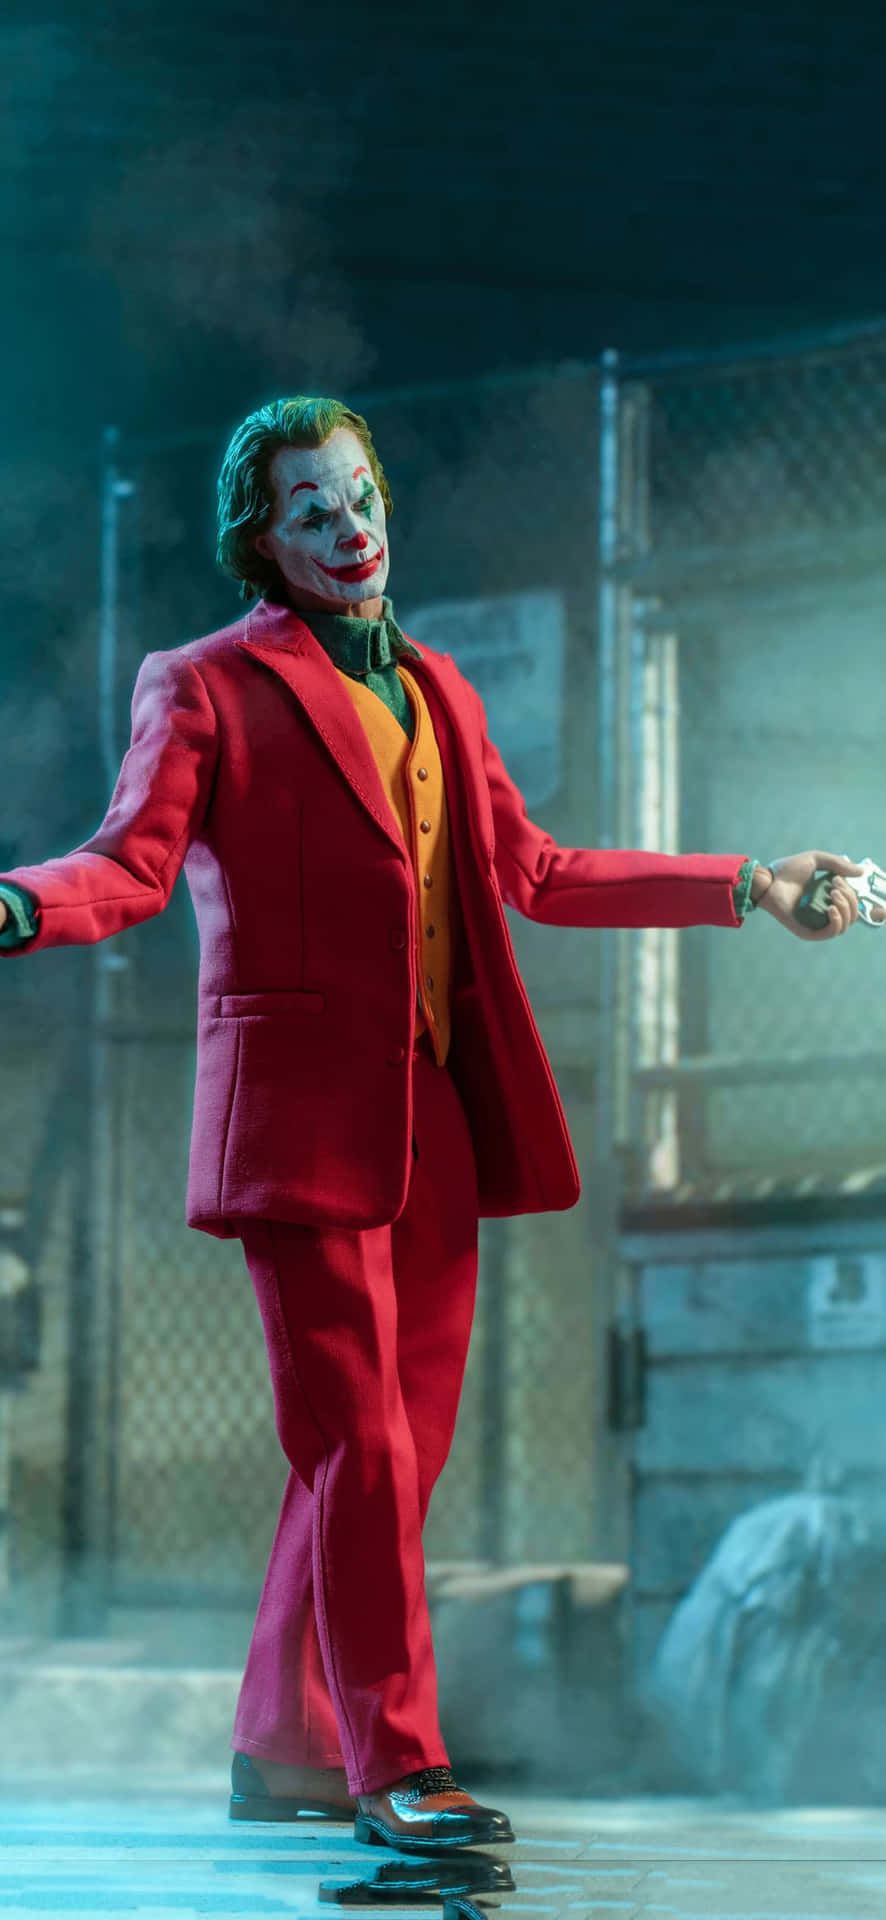 The Joker Is Holding A Gun And Is Holding A Gun Background